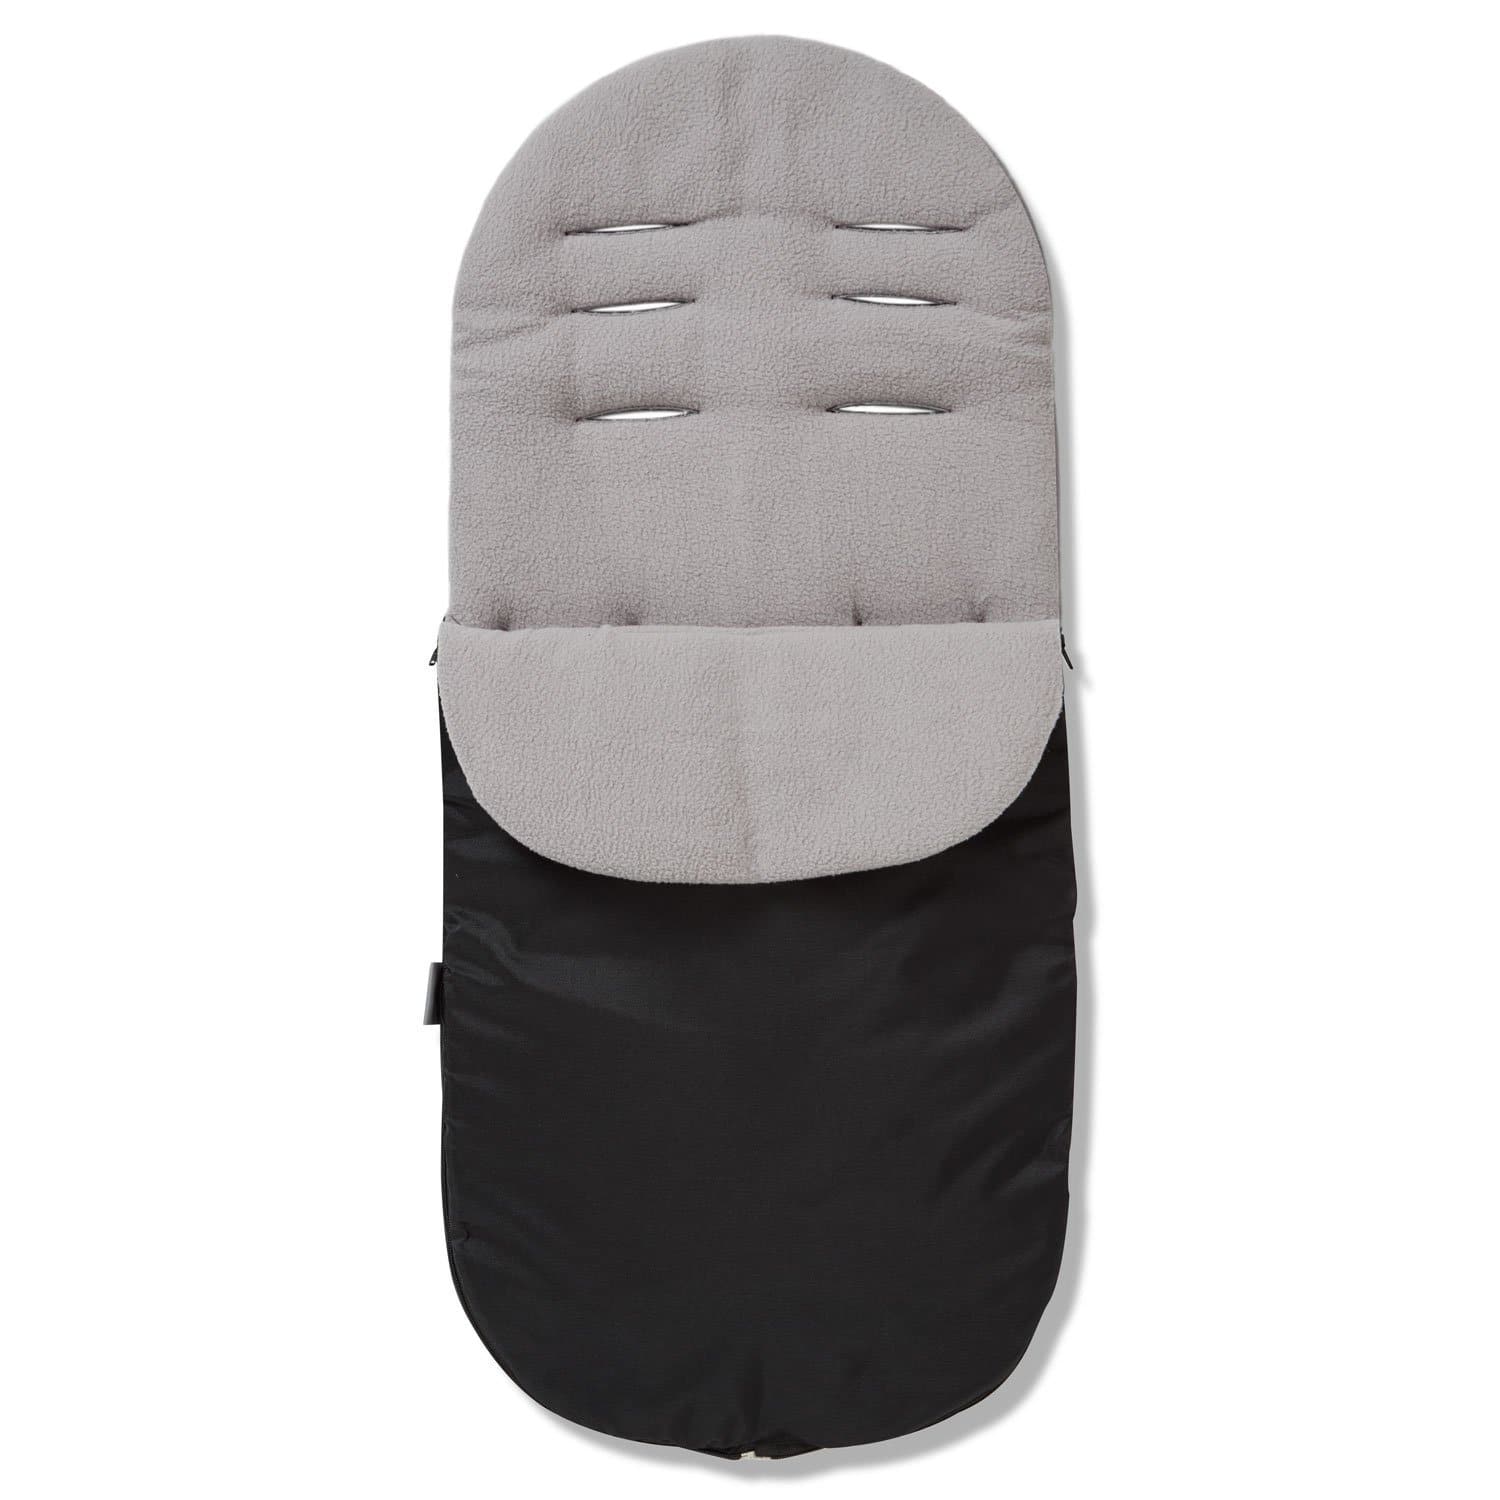 Footmuff / Cosy Toes Compatible with Kiddicouture - Grey / Fits All Models | For Your Little One